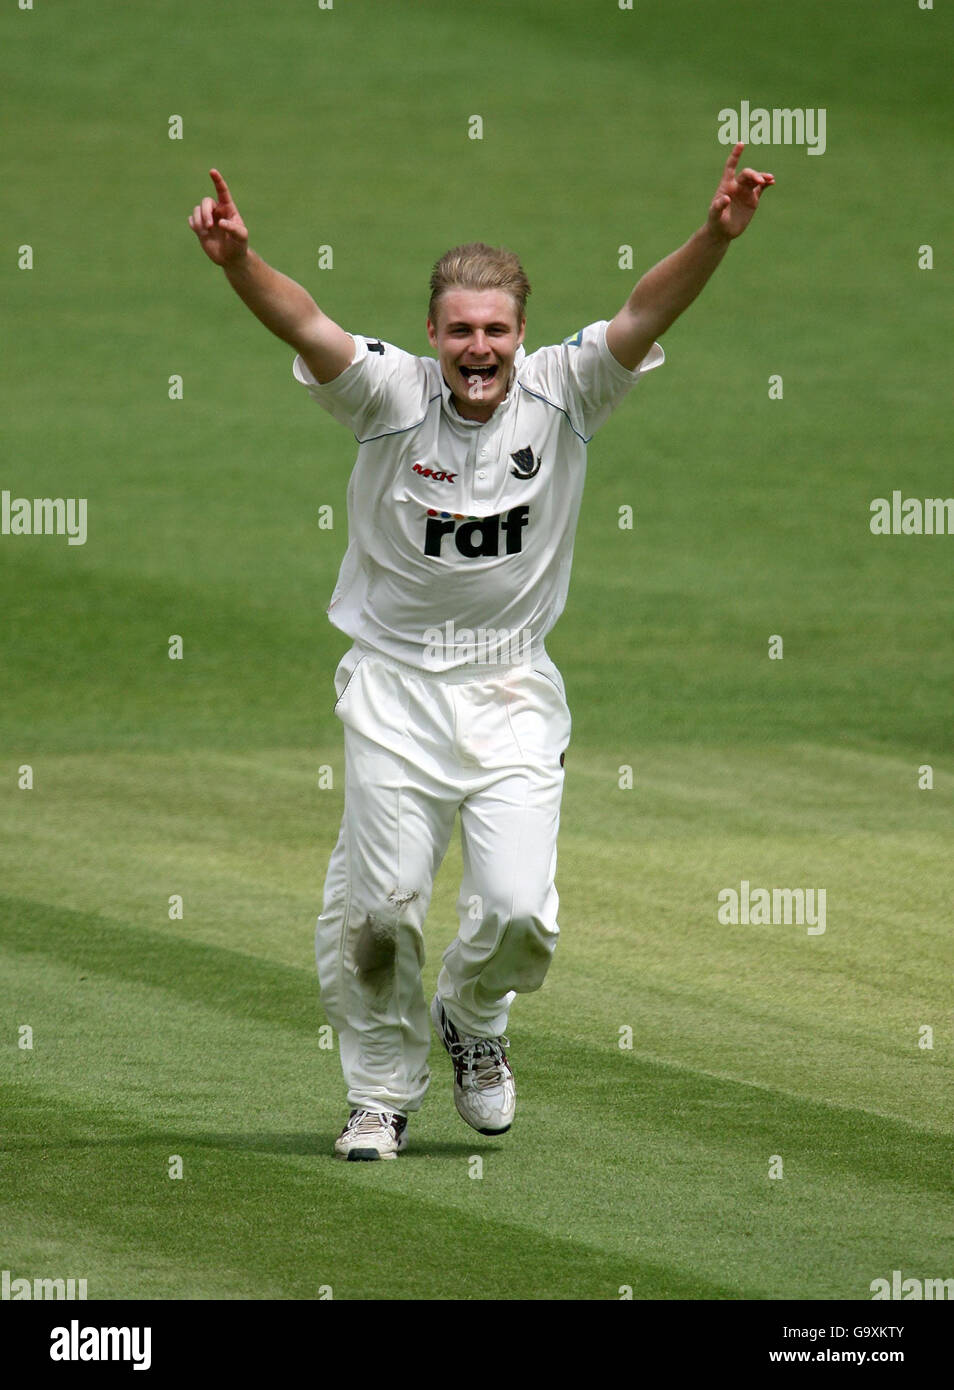 Sussex's Luke Wright celebrates taking the wicket of Surrey's Scott Newman caught by Robin Martin-Jenkins during the Liverpool Victoria County Championship Division One match at the County Cricket Ground, Hove. Stock Photo